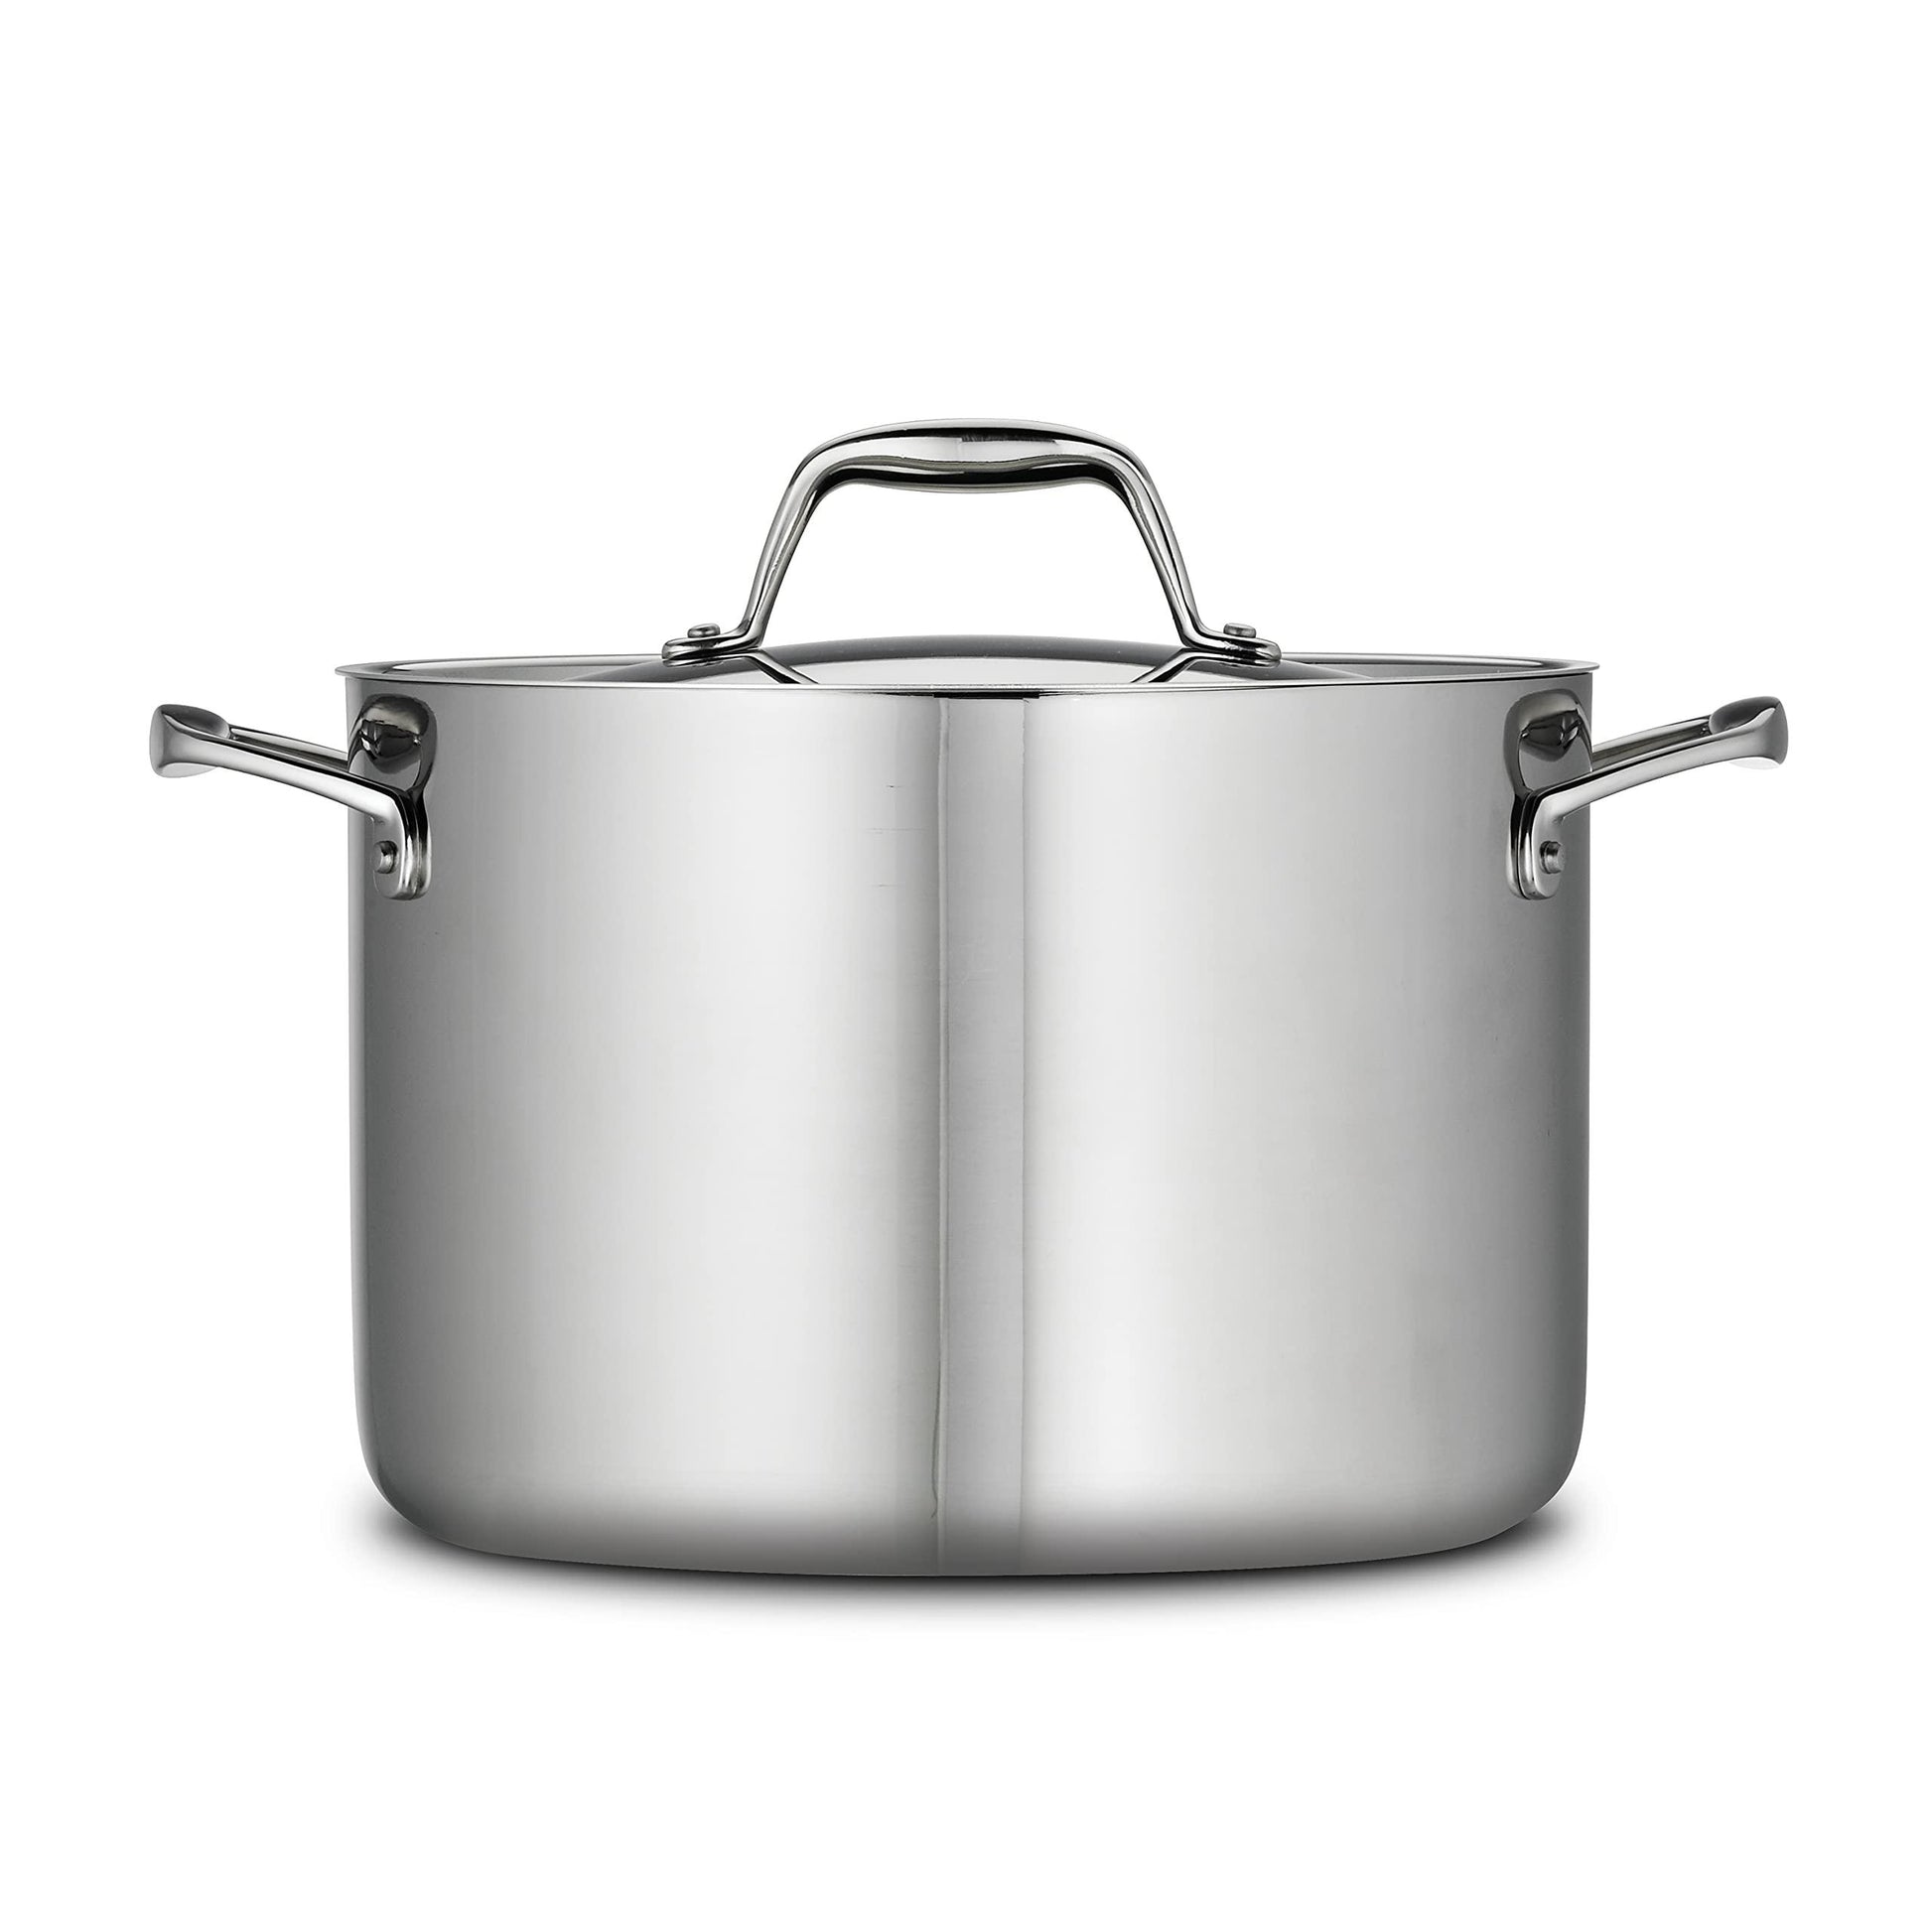 Tramontina Covered Stock Pot Stainless Steel Induction-Ready Tri-Ply Clad 8 Quart, 80116/041DS - CookCave